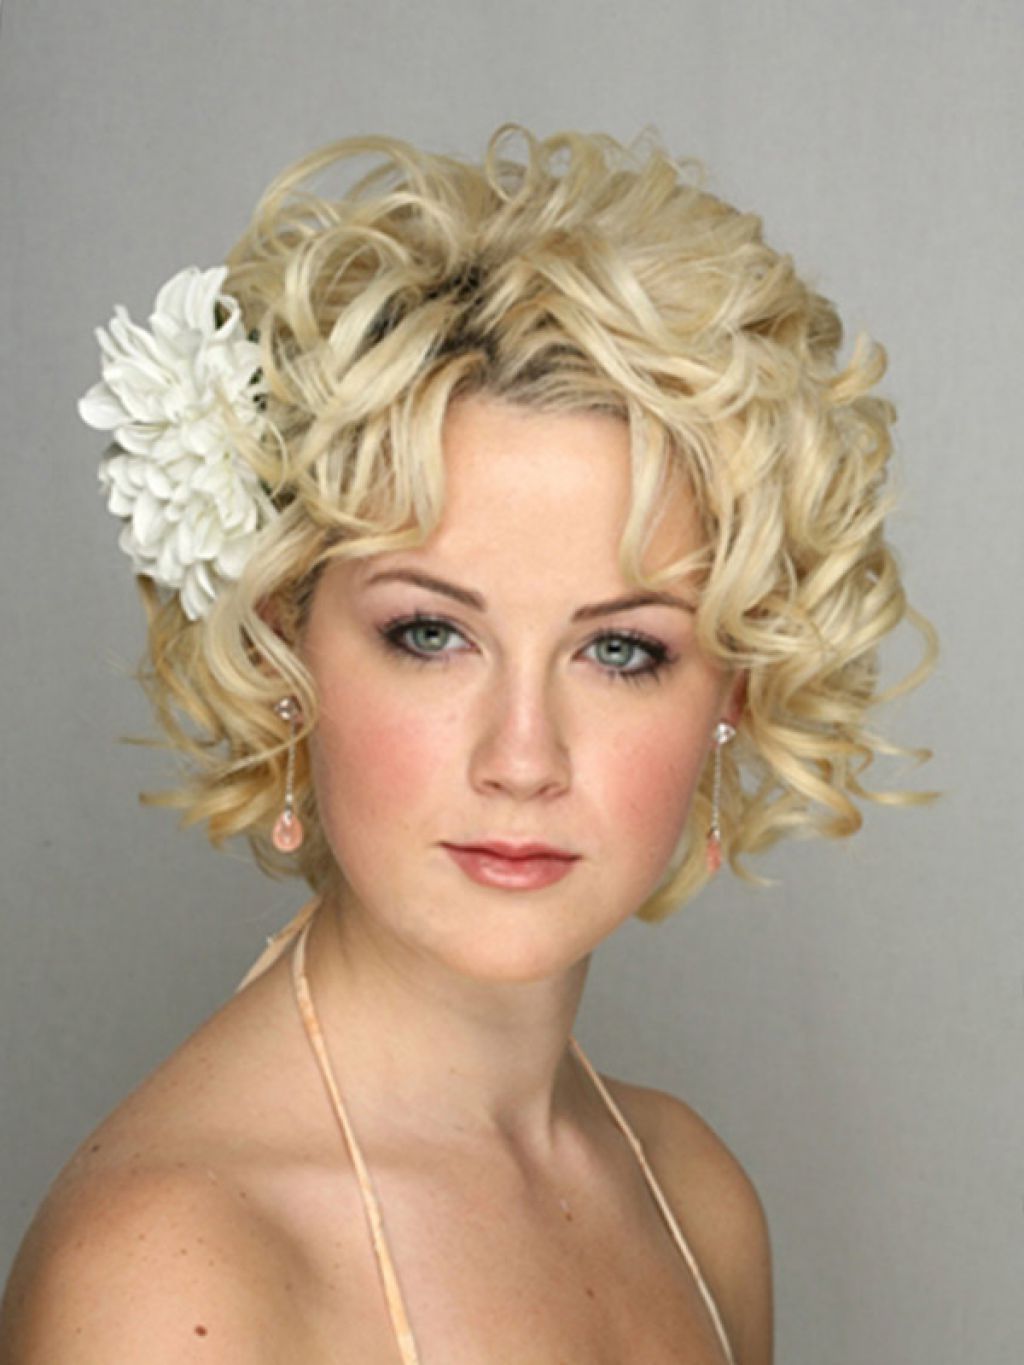 Preferred Wedding Hairstyles For Short Blonde Hair Throughout Wedding Guest Hairstyles For Medium Length Hair – Hairstyle For (View 5 of 15)